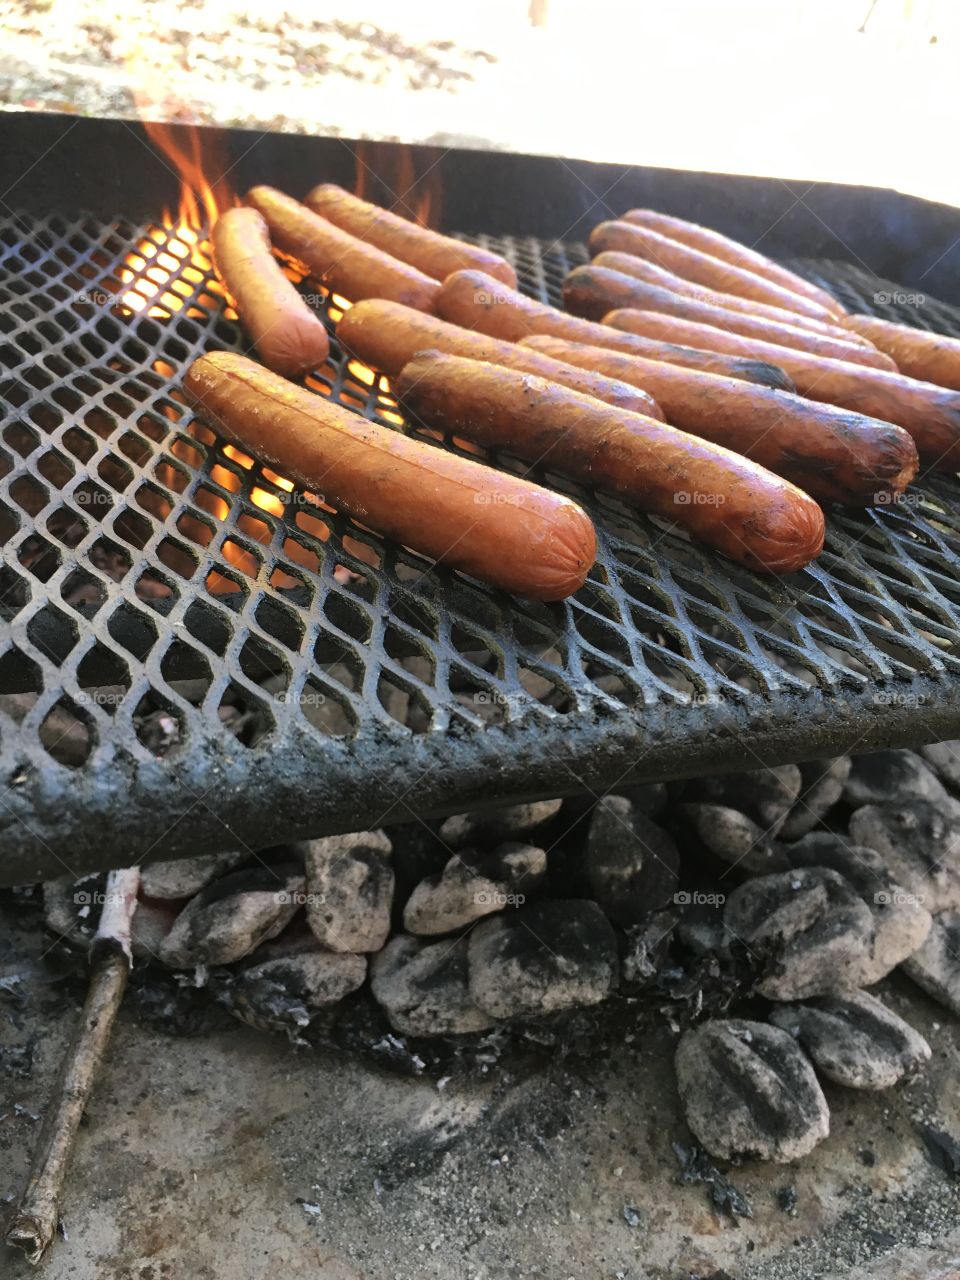 Grilling hotdog on charcoal grill